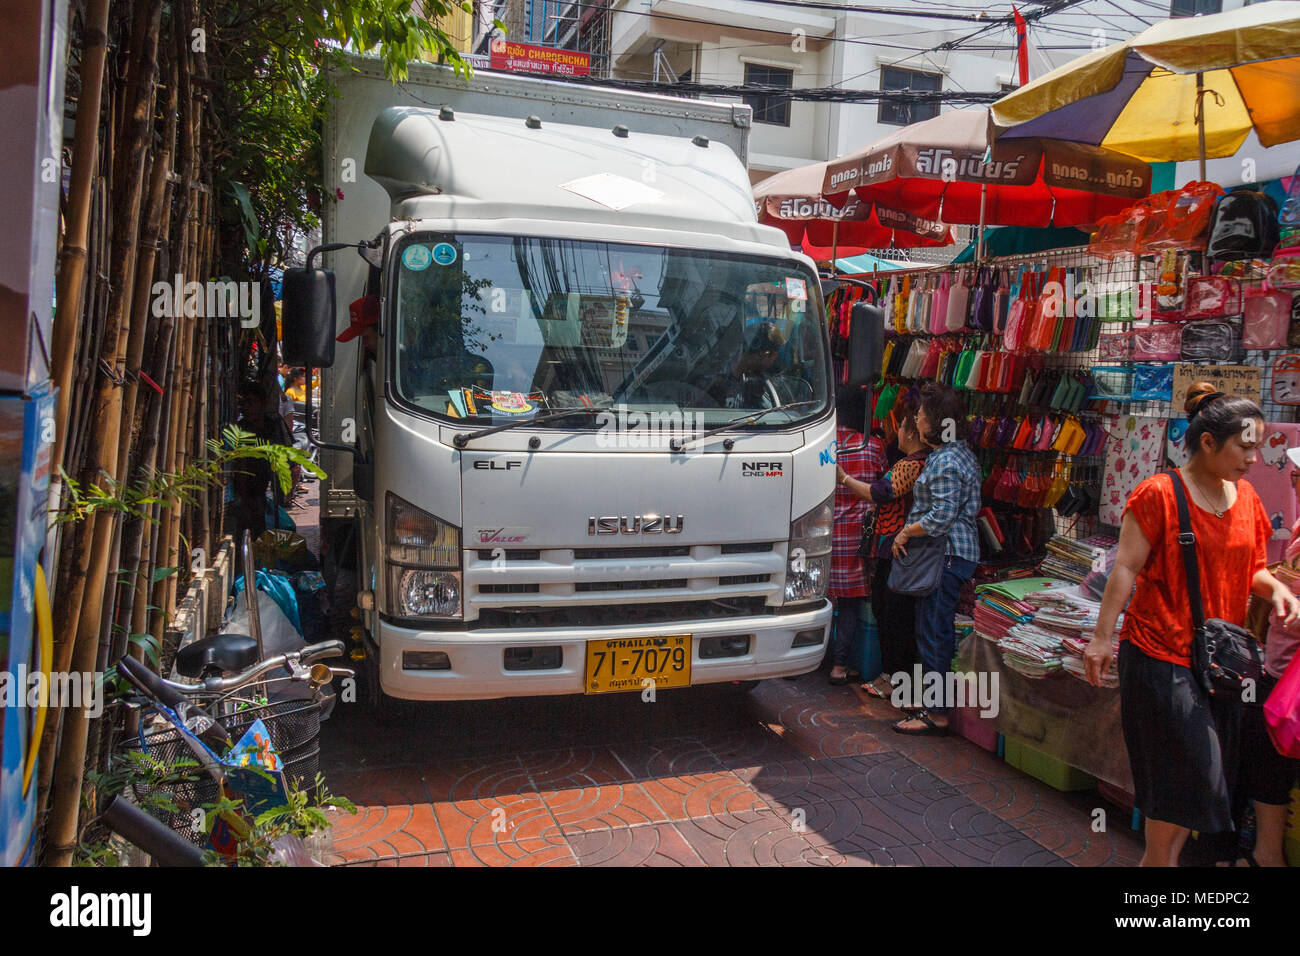 A truck squeezes its way past market stalls on a lane in Chinatown, Bangkok, Thailand Stock Photo